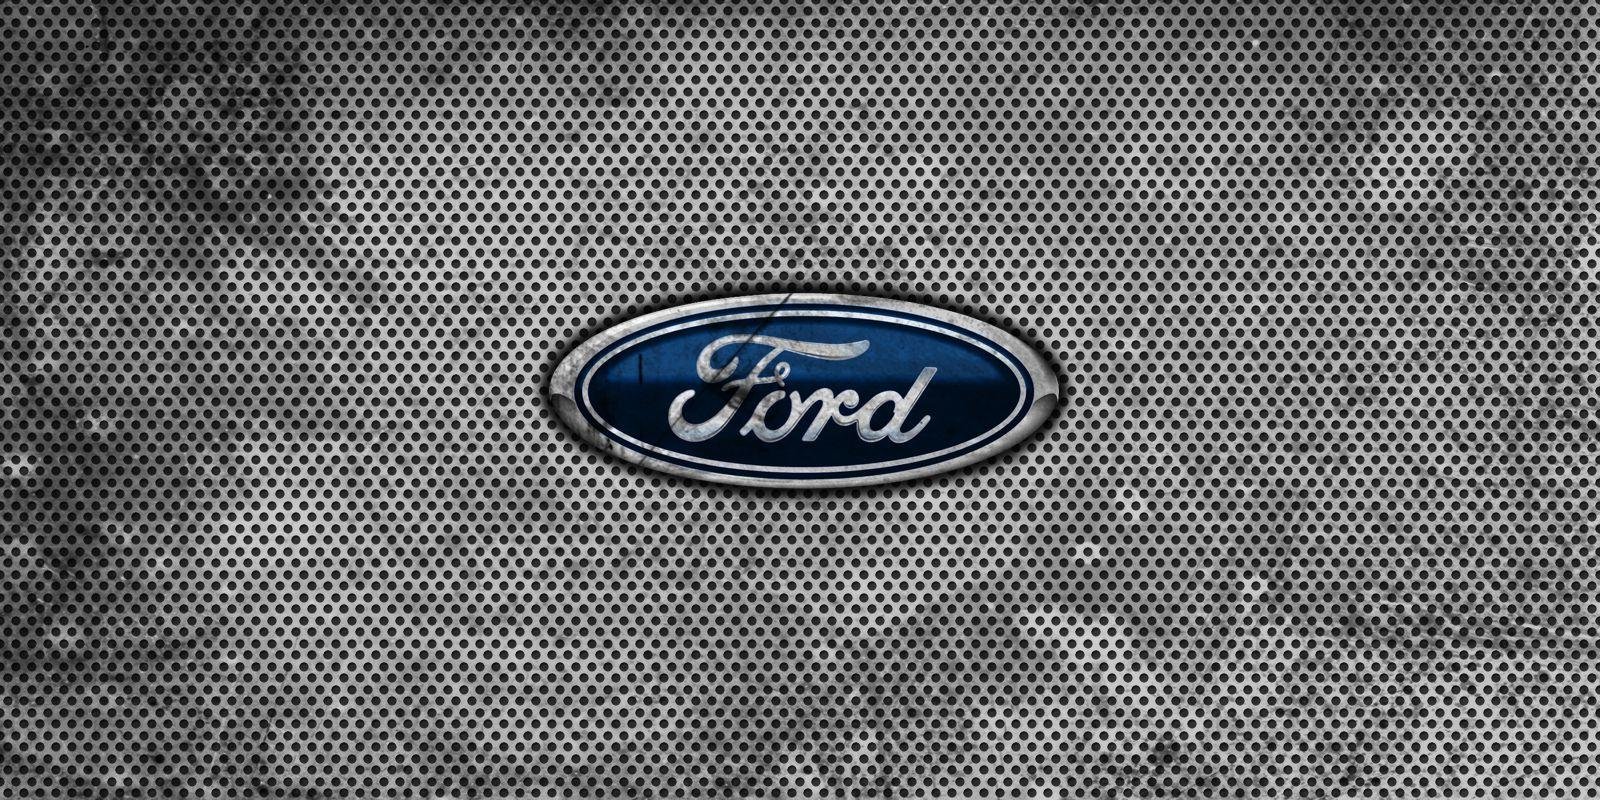 Cool New Ford Logo - Ford Logo, Ford Car Symbol Meaning and History | Car Brand Names.com